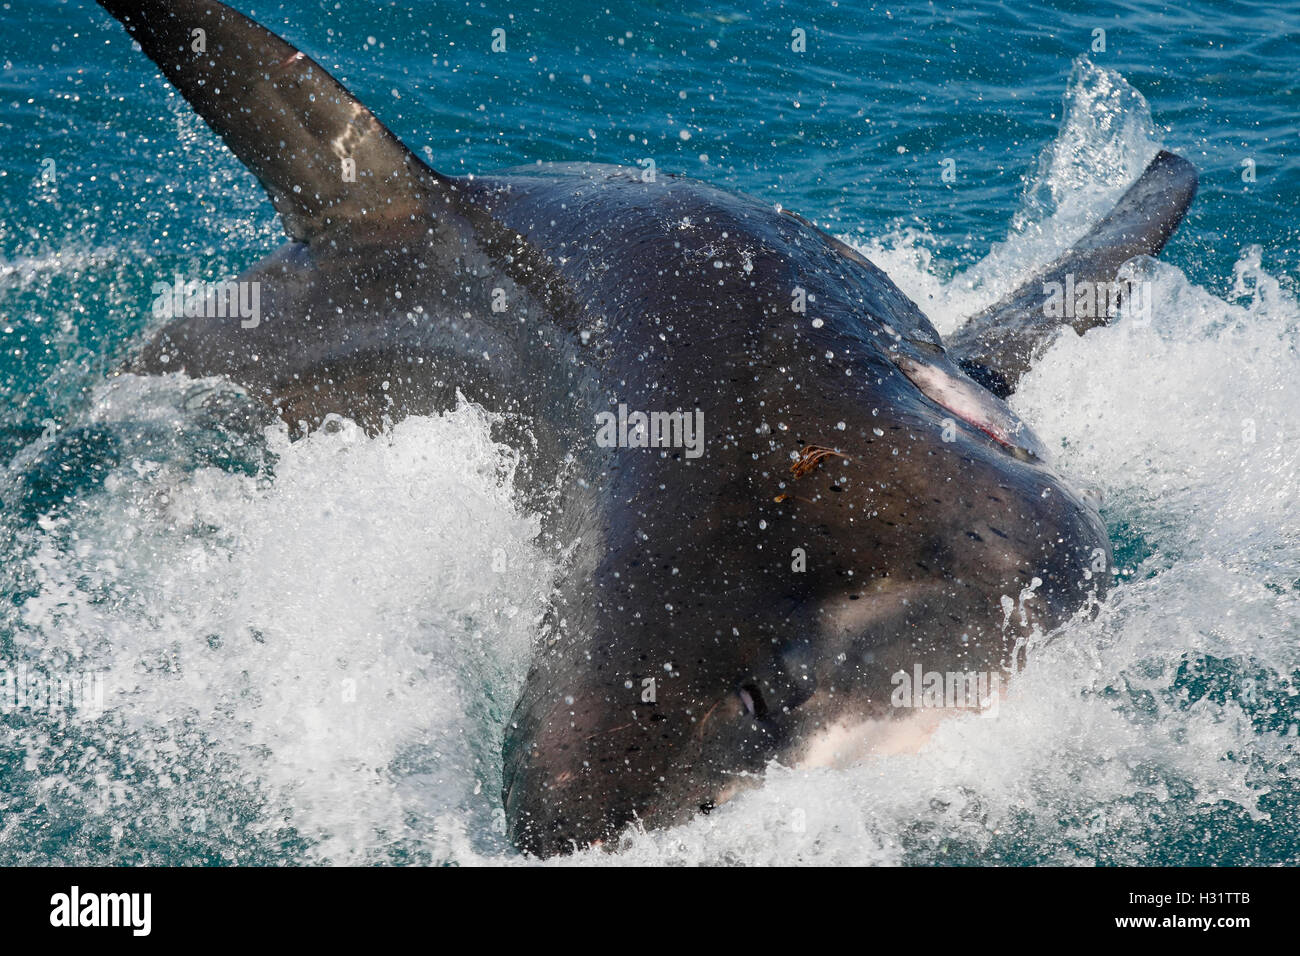 Great White Shark (Carcharodon carcharias) thrashes at the surface. Photo Copyright © Brandon Cole. All rights reserved worldwid Stock Photo